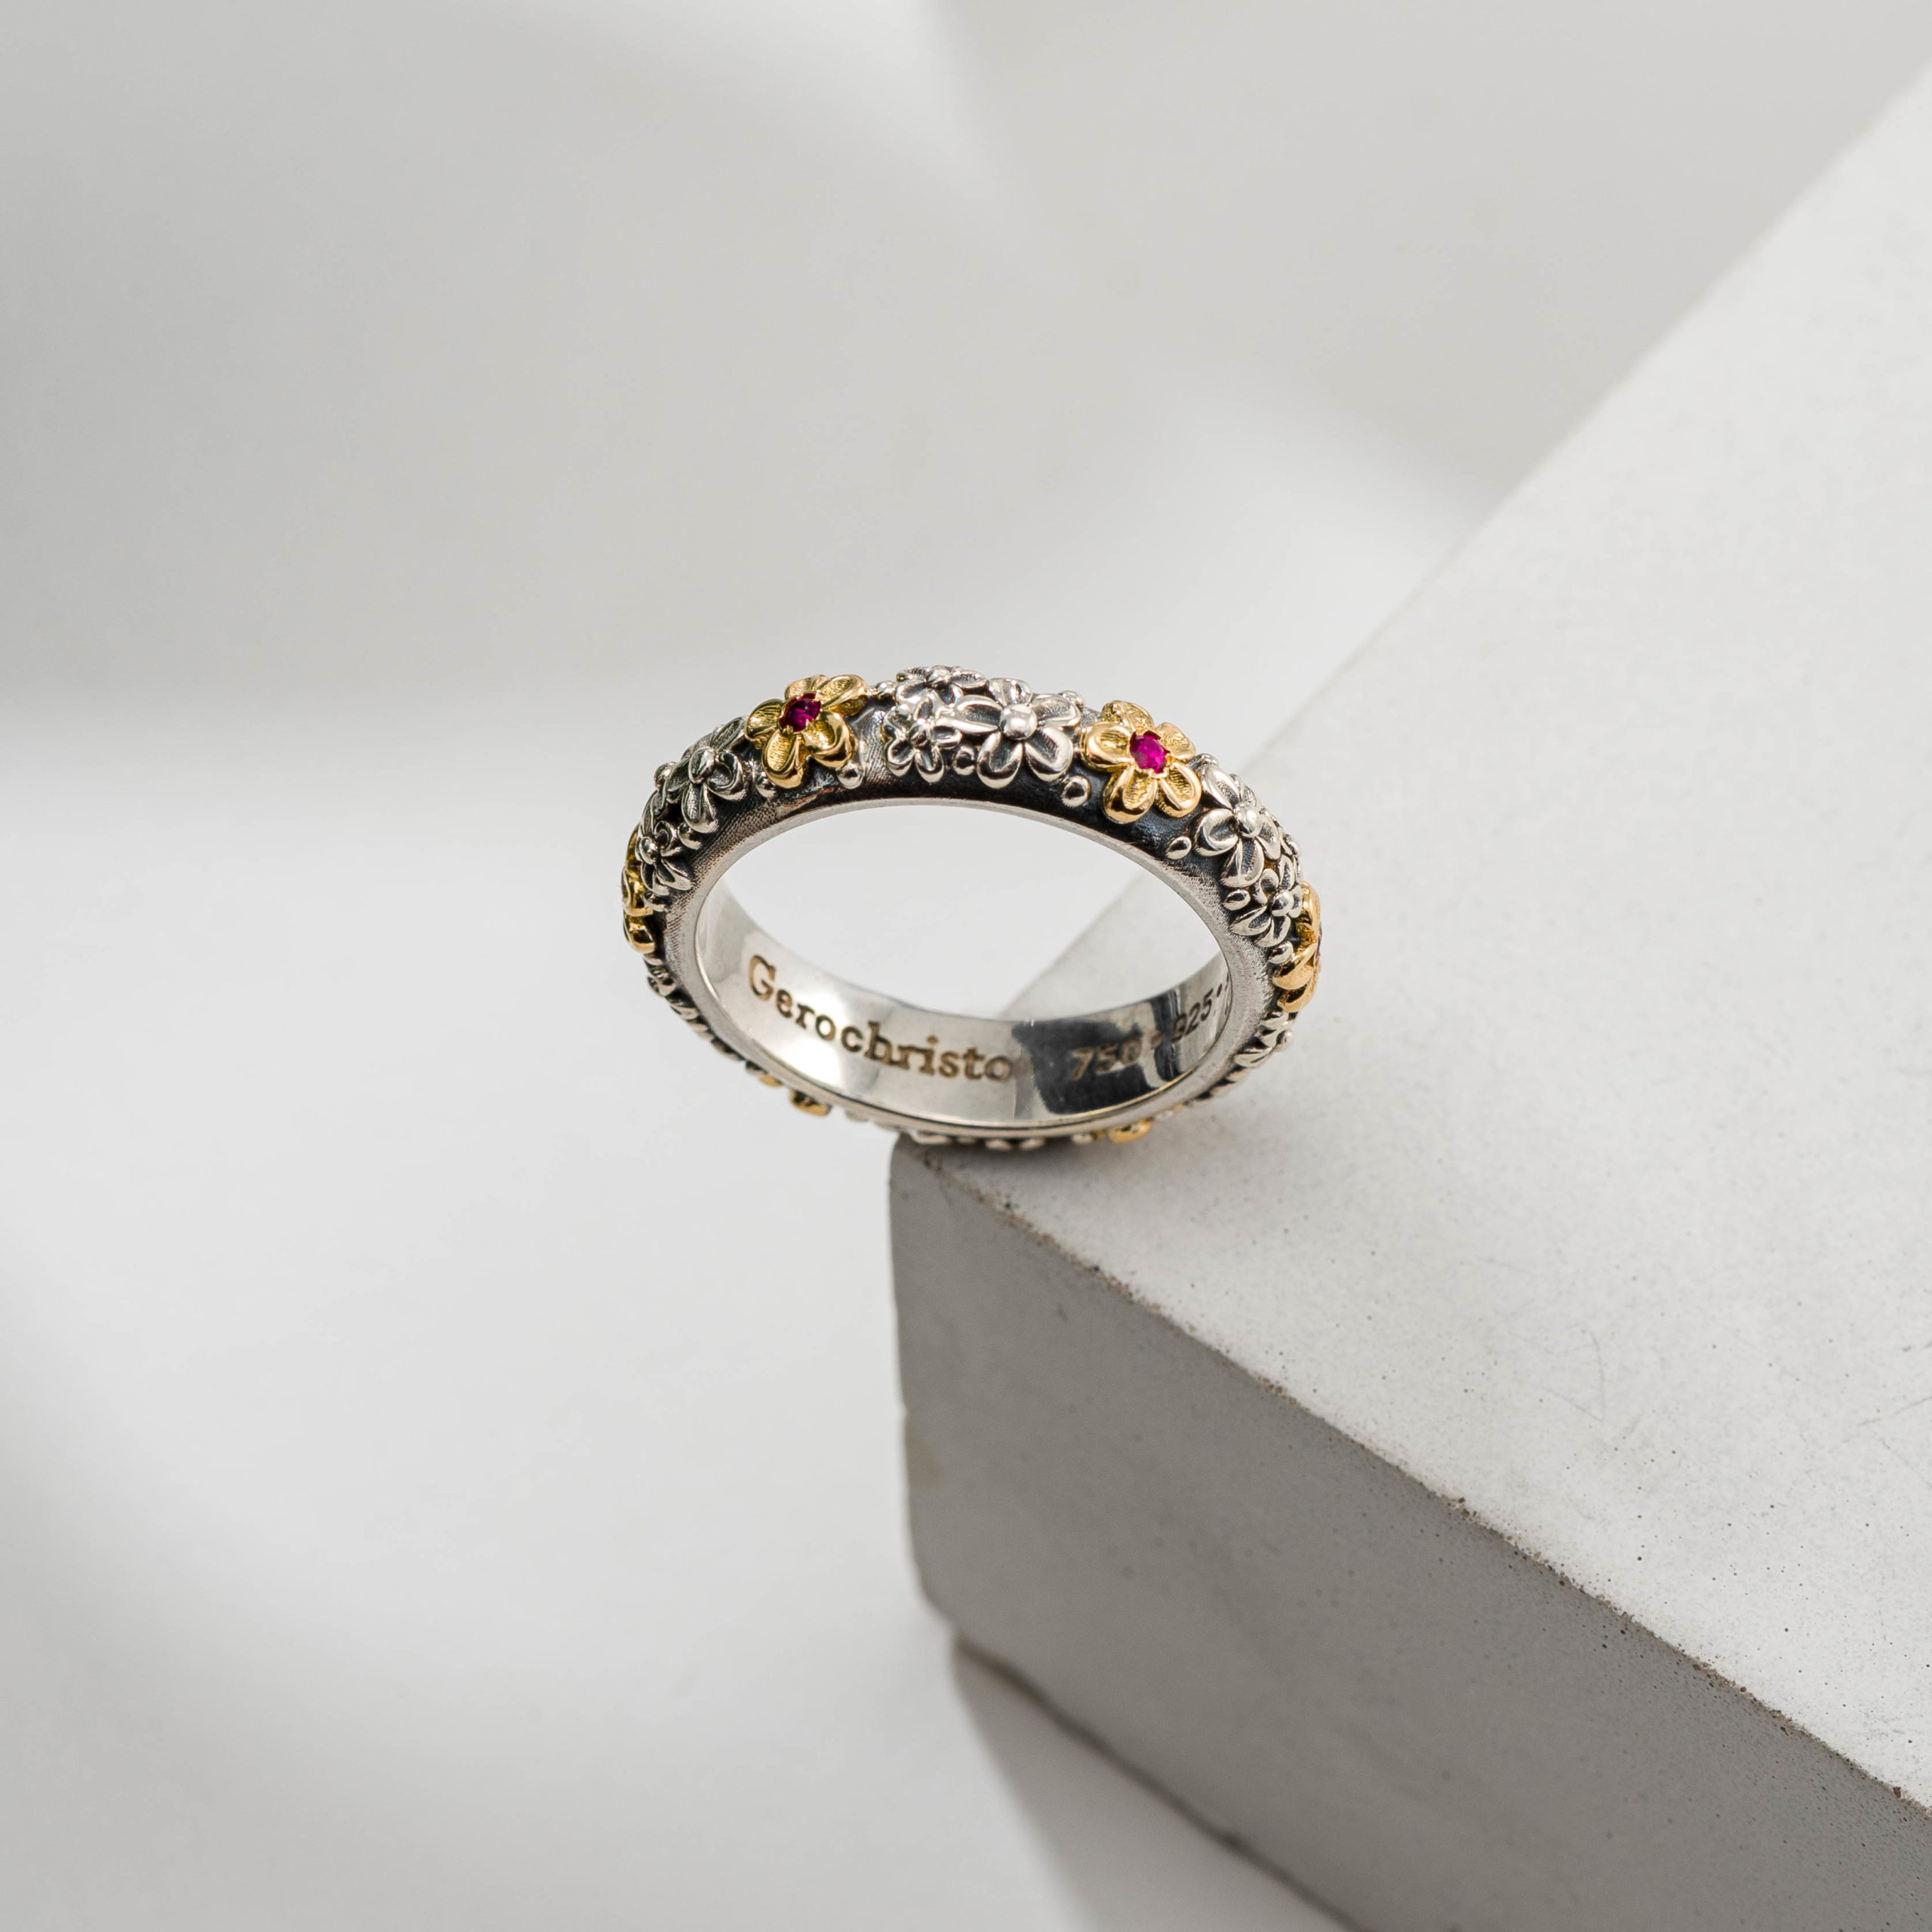 Wild Flowers Anthemis ring in sterling silver with 18K solid Yellow Gold and precious stones